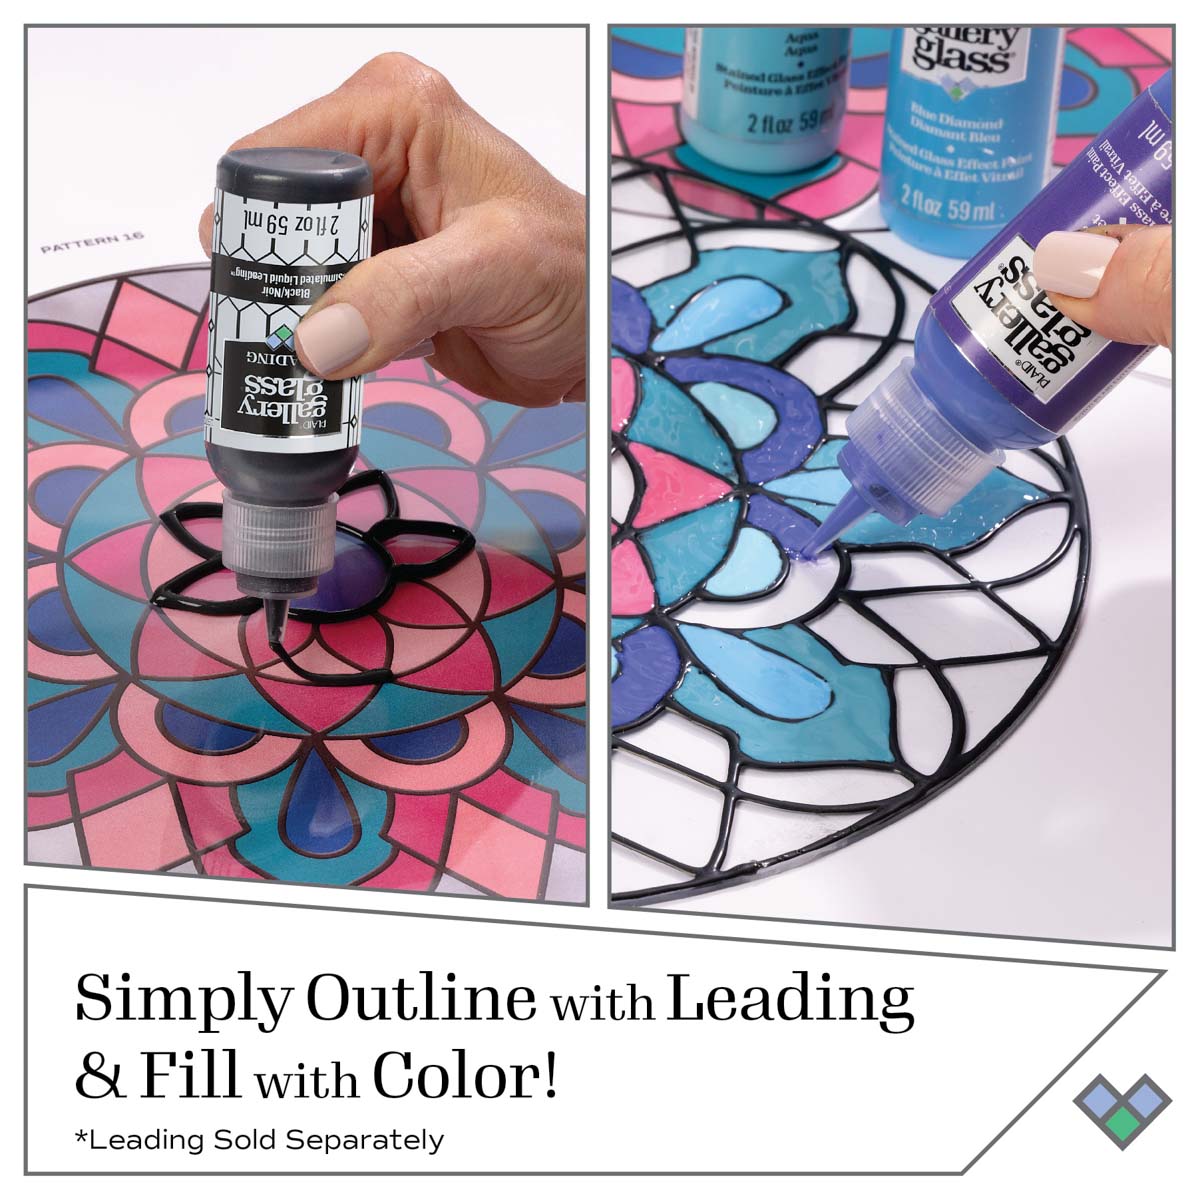 Gallery Glass ® Stained Glass Effect Paint - Ruby Red, 2 oz. - 19691